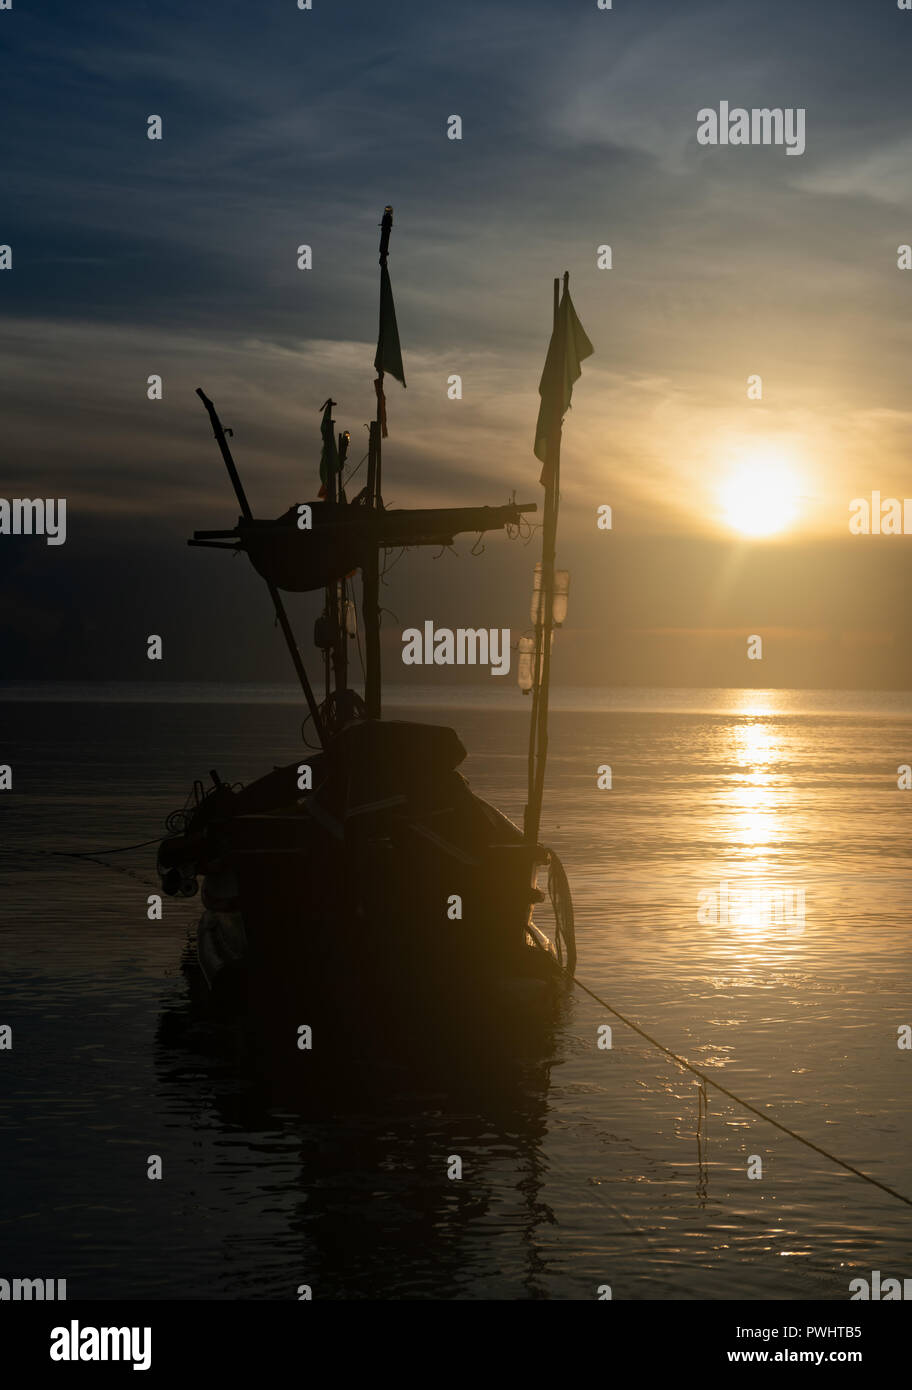 Small fishing boat on the sea during sunset Stock Photo